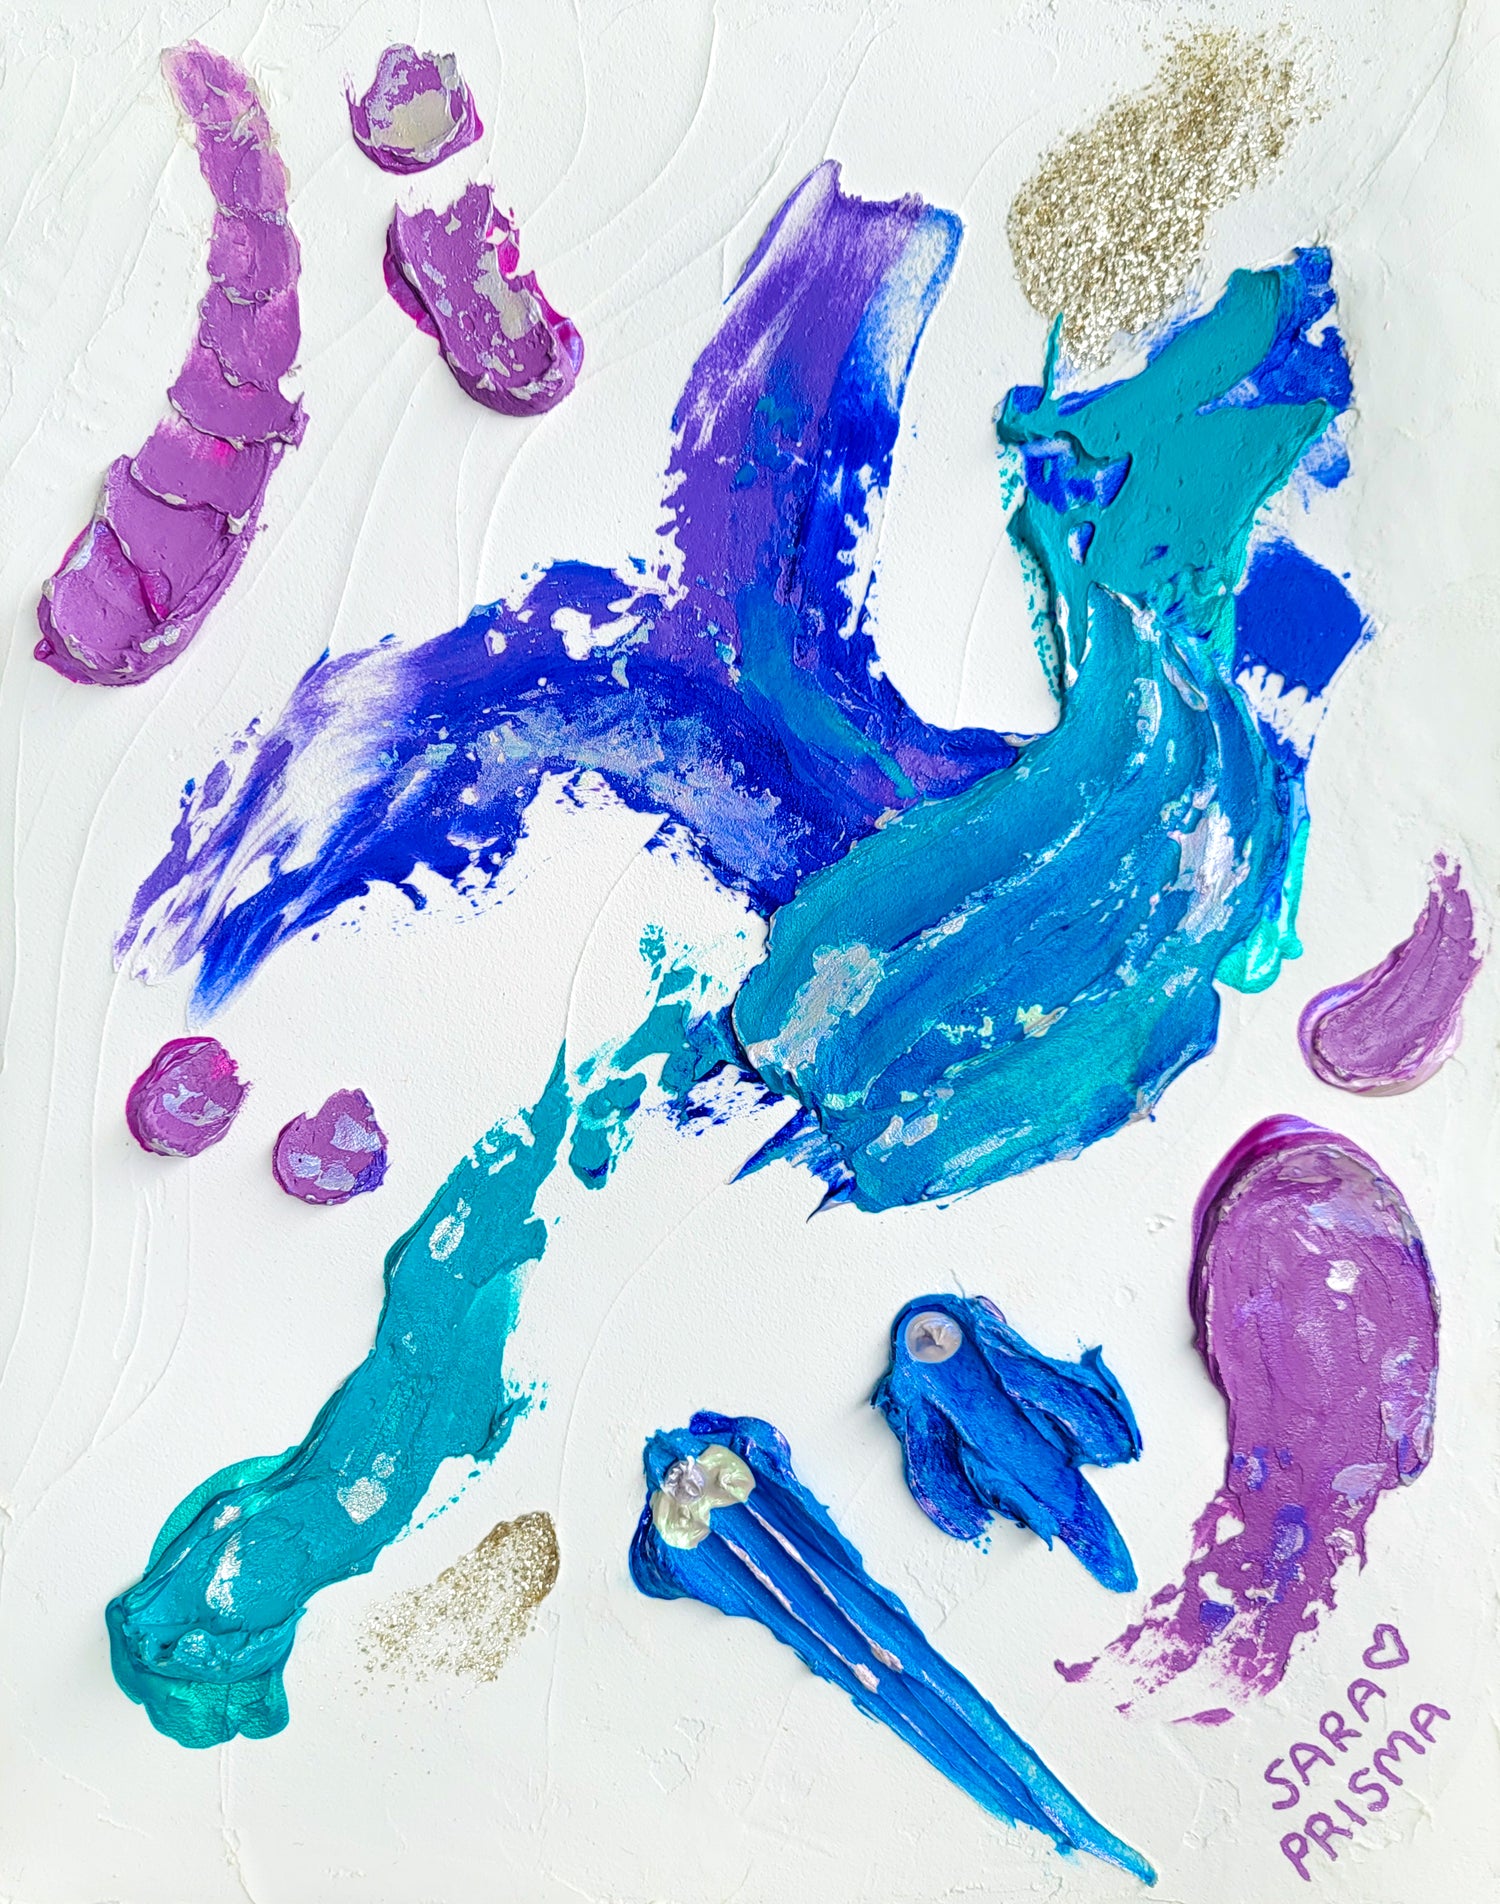 Vibrant and optimistic commissioned abstract painting for Toronto Ontario Canada art collector. Displays a magical teal gestural sweep, with accents of royal blue, grape purple, and violet. Shining gleams of mica flakes give an ethereal feeling to artwork